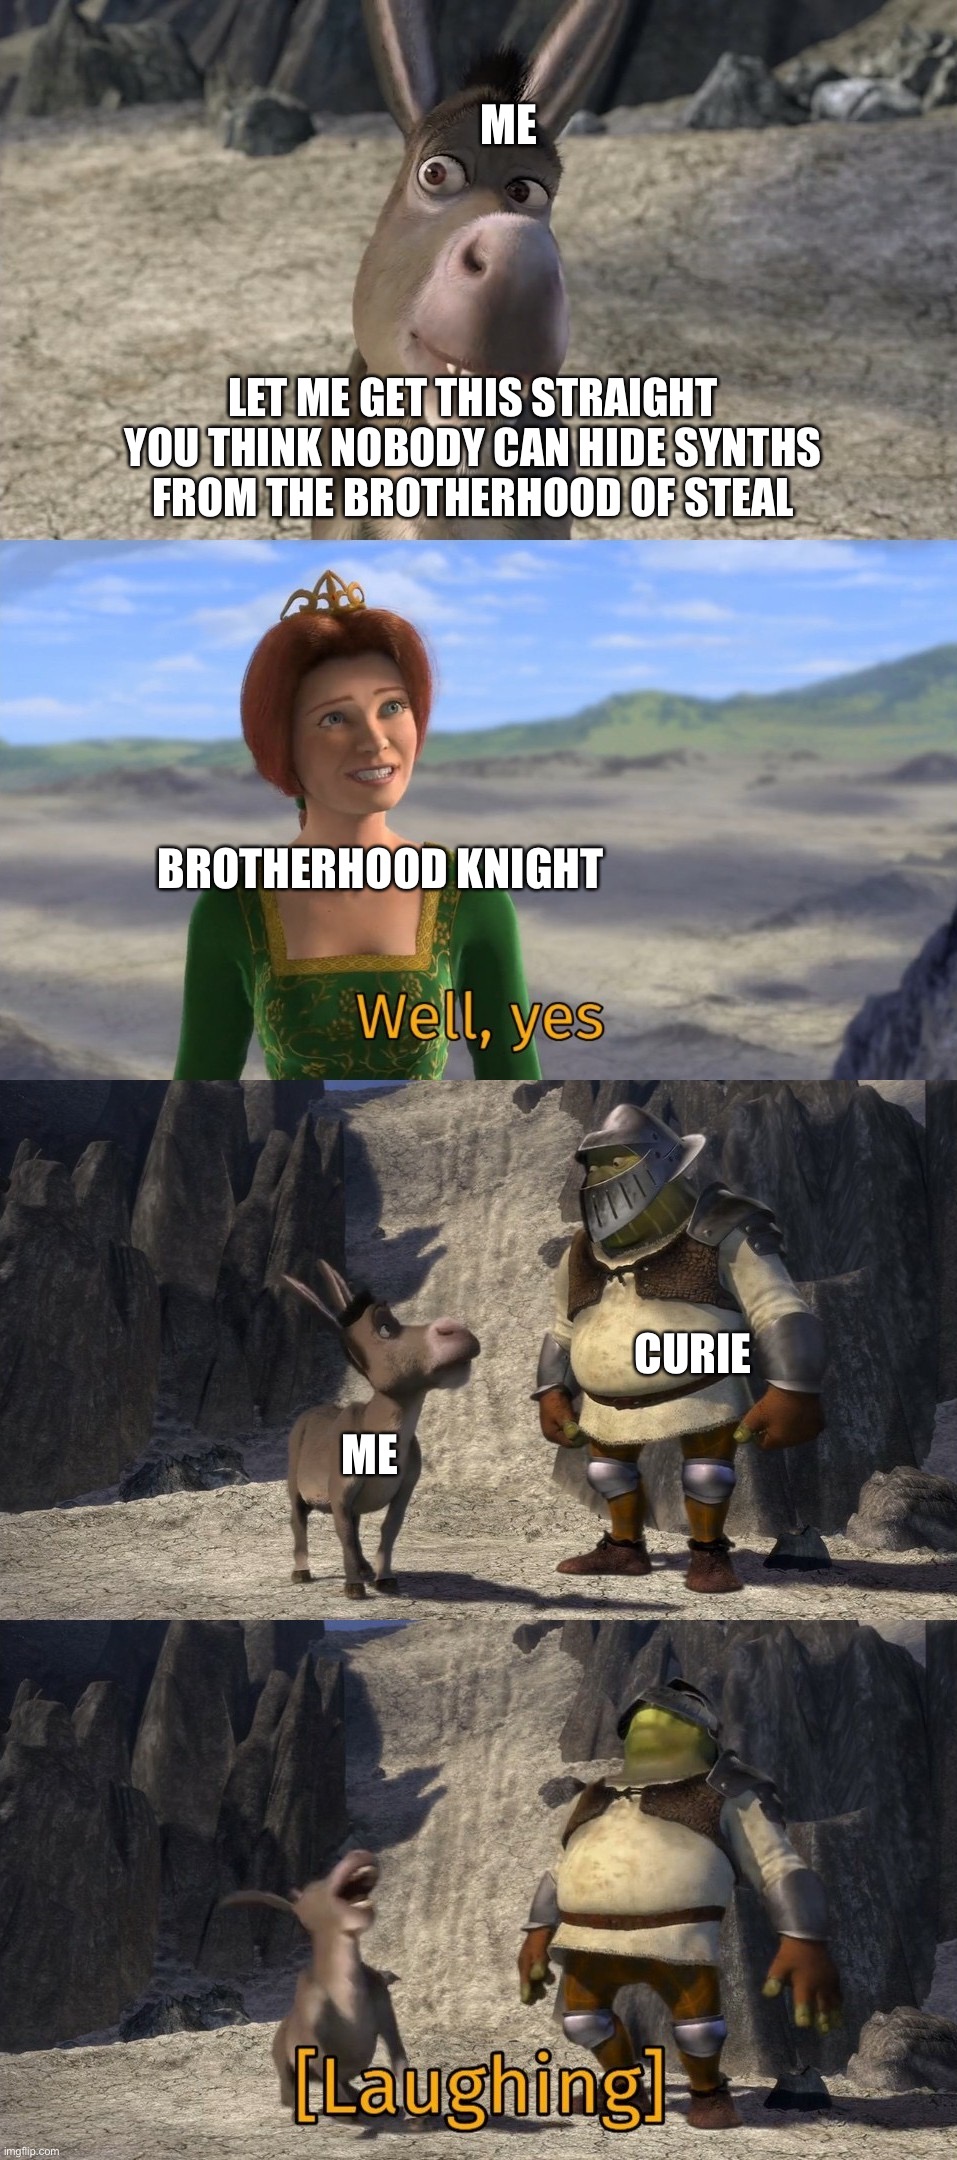 Shrek well yes | ME; LET ME GET THIS STRAIGHT YOU THINK NOBODY CAN HIDE SYNTHS FROM THE BROTHERHOOD OF STEAL; BROTHERHOOD KNIGHT; CURIE; ME | image tagged in shrek well yes | made w/ Imgflip meme maker